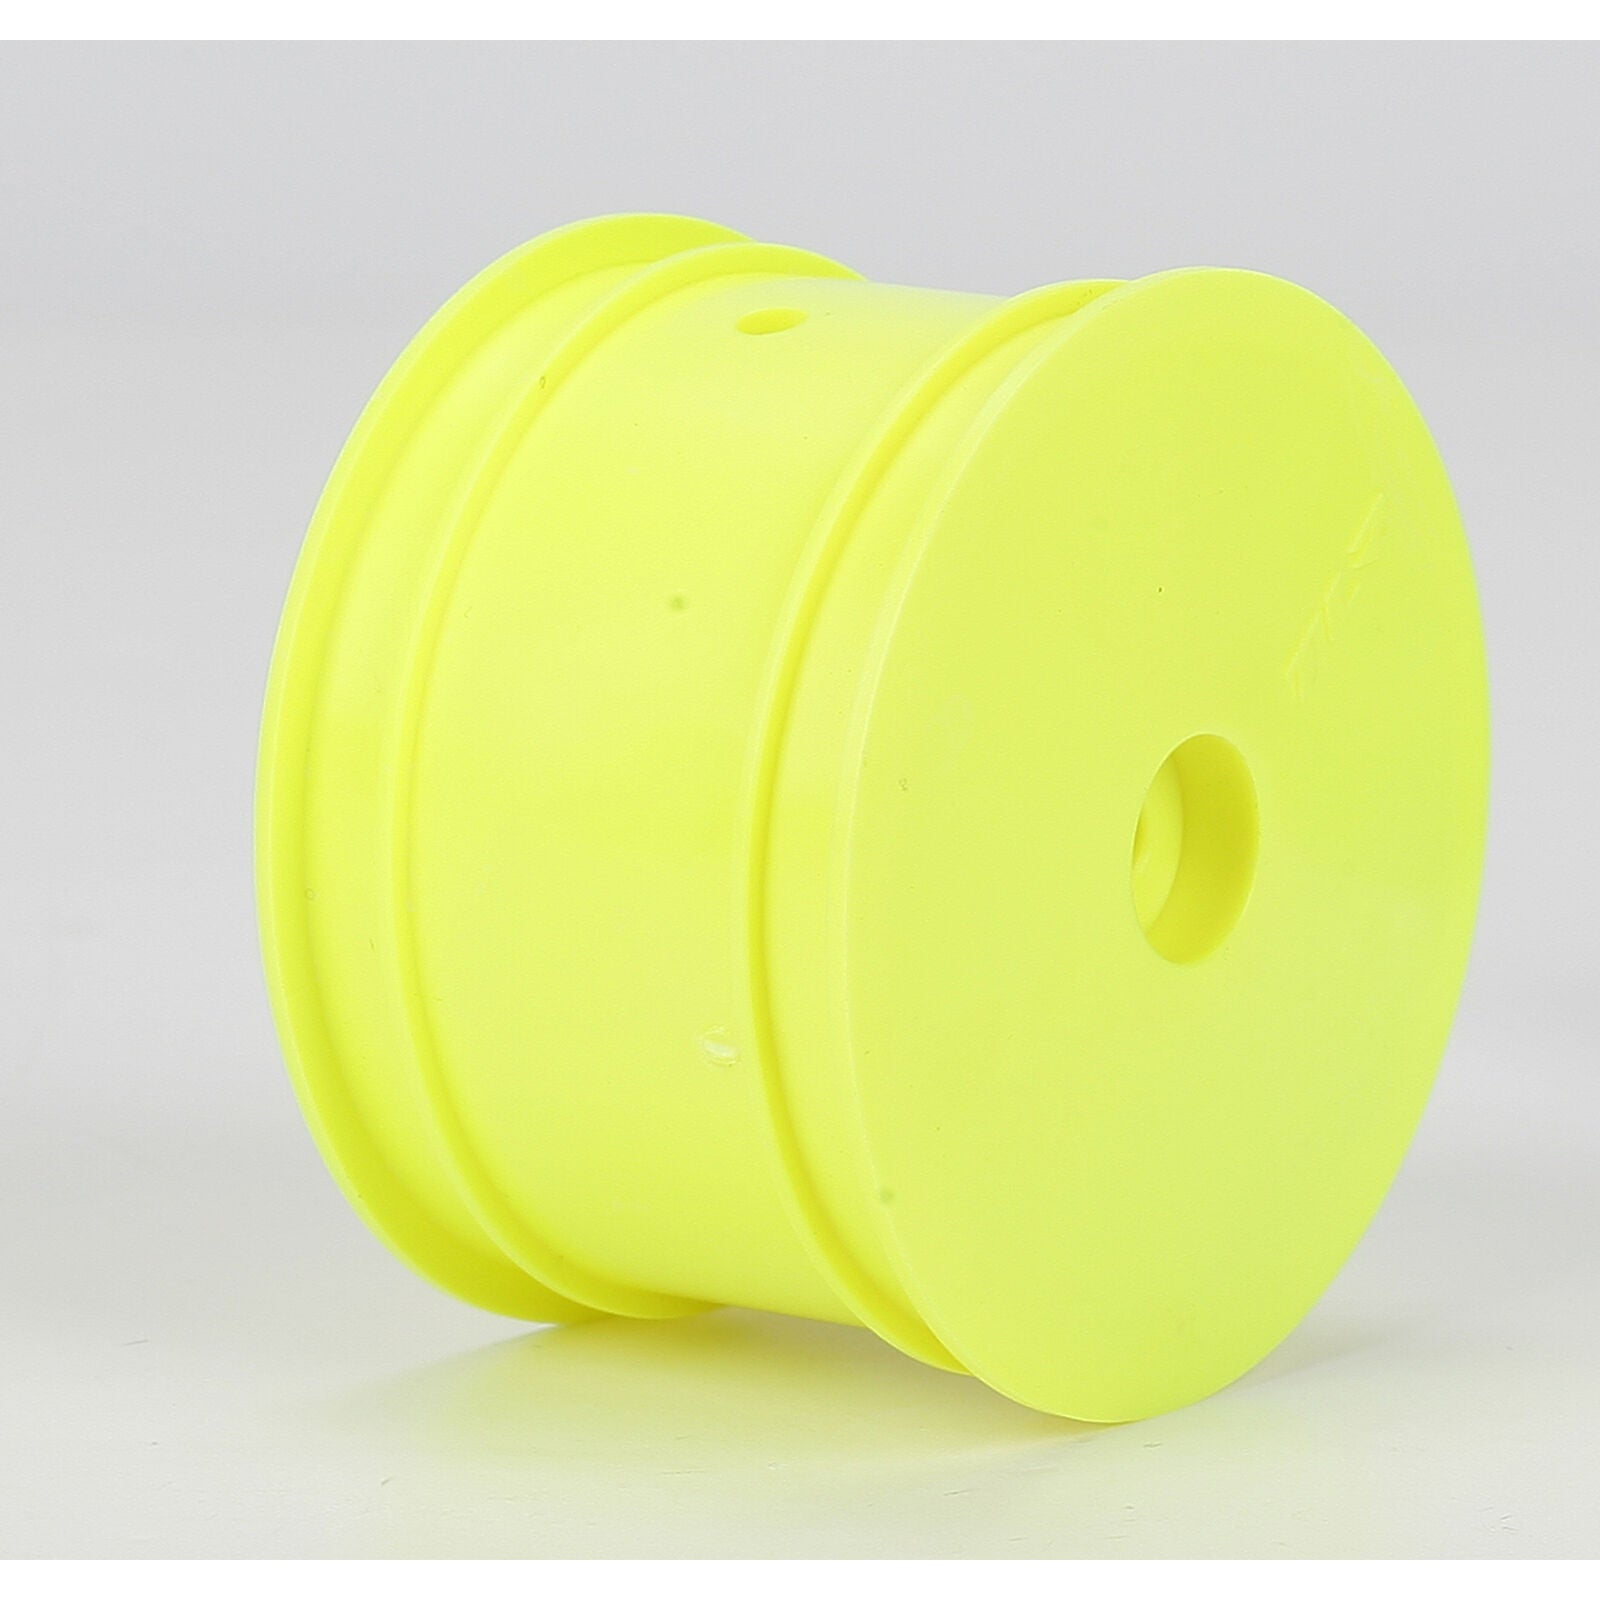 TLR Rear Wheel, Yellow, 2pcs, (22 3.0/22-4) - TLR7101 - [Sunshine-Coast] - Losi - [RC-Car] - [Scale-Model]